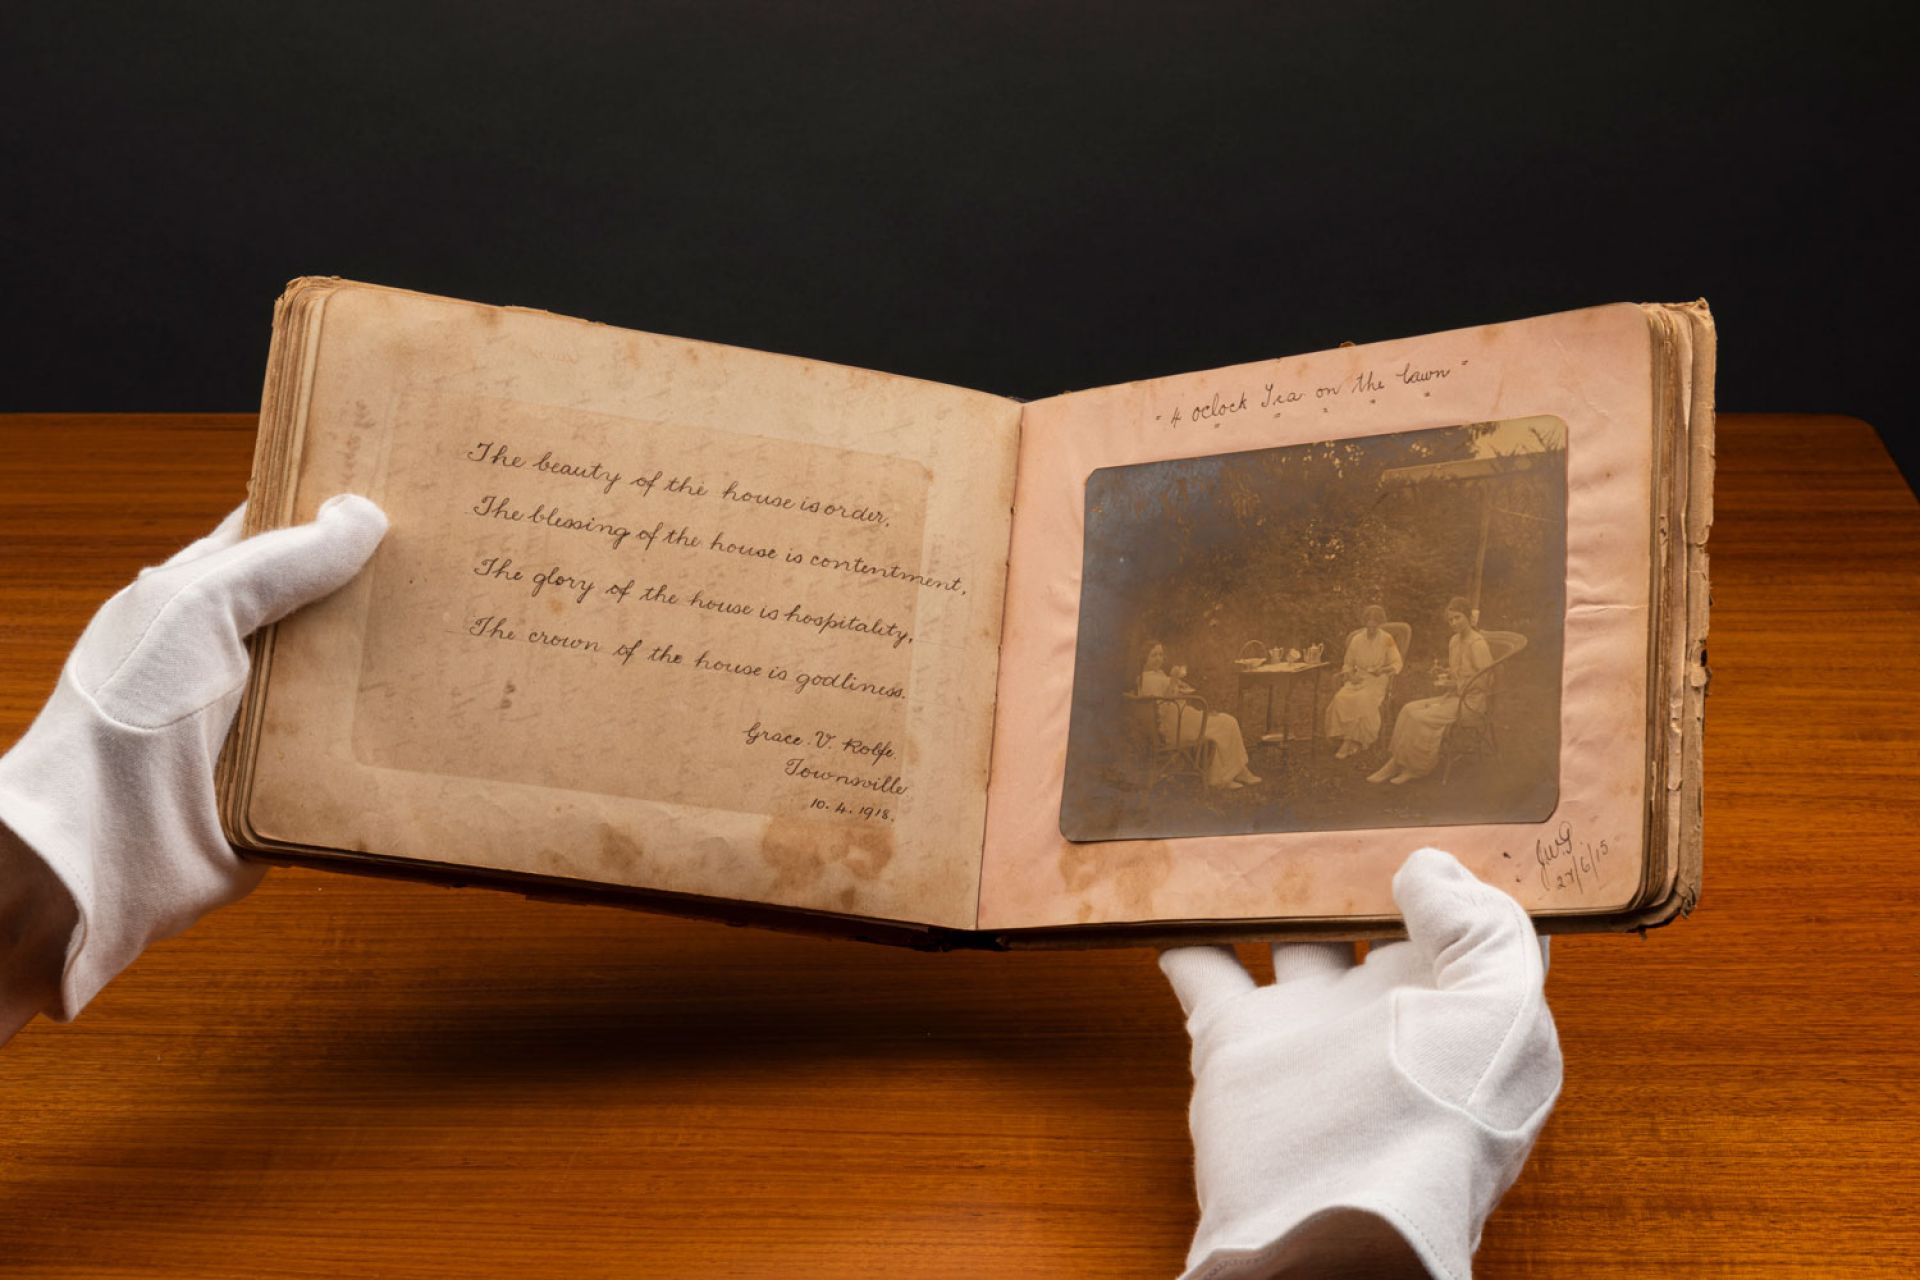 gloved hands open an old book to show an inscription on one side, and a photo on the other